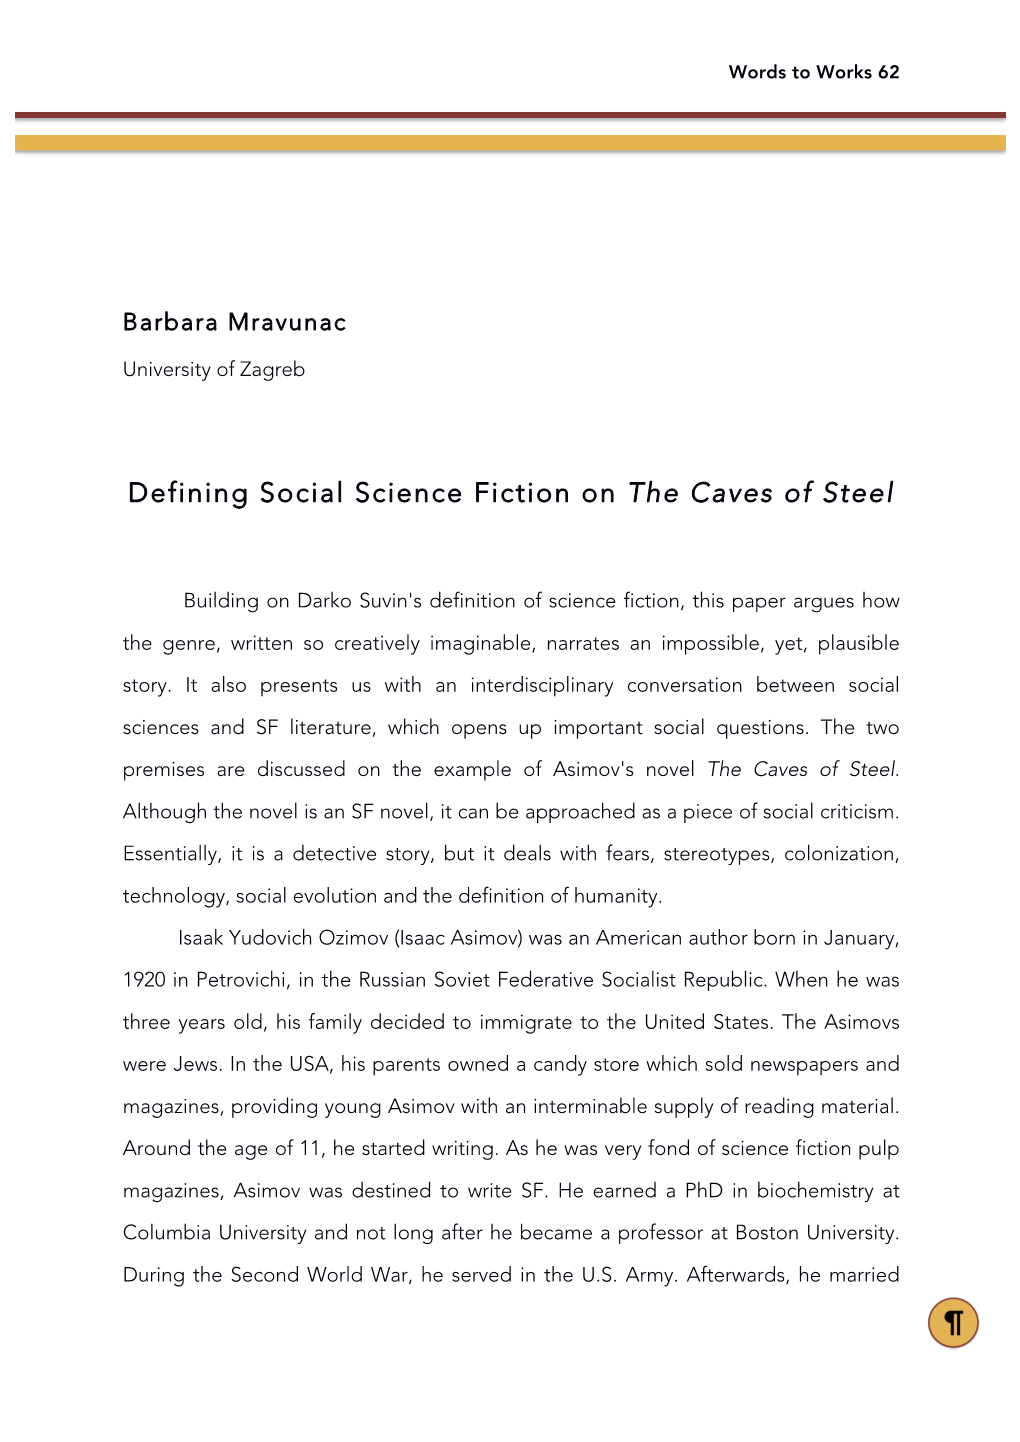 Defining Social Science Fiction on the Caves of Steel